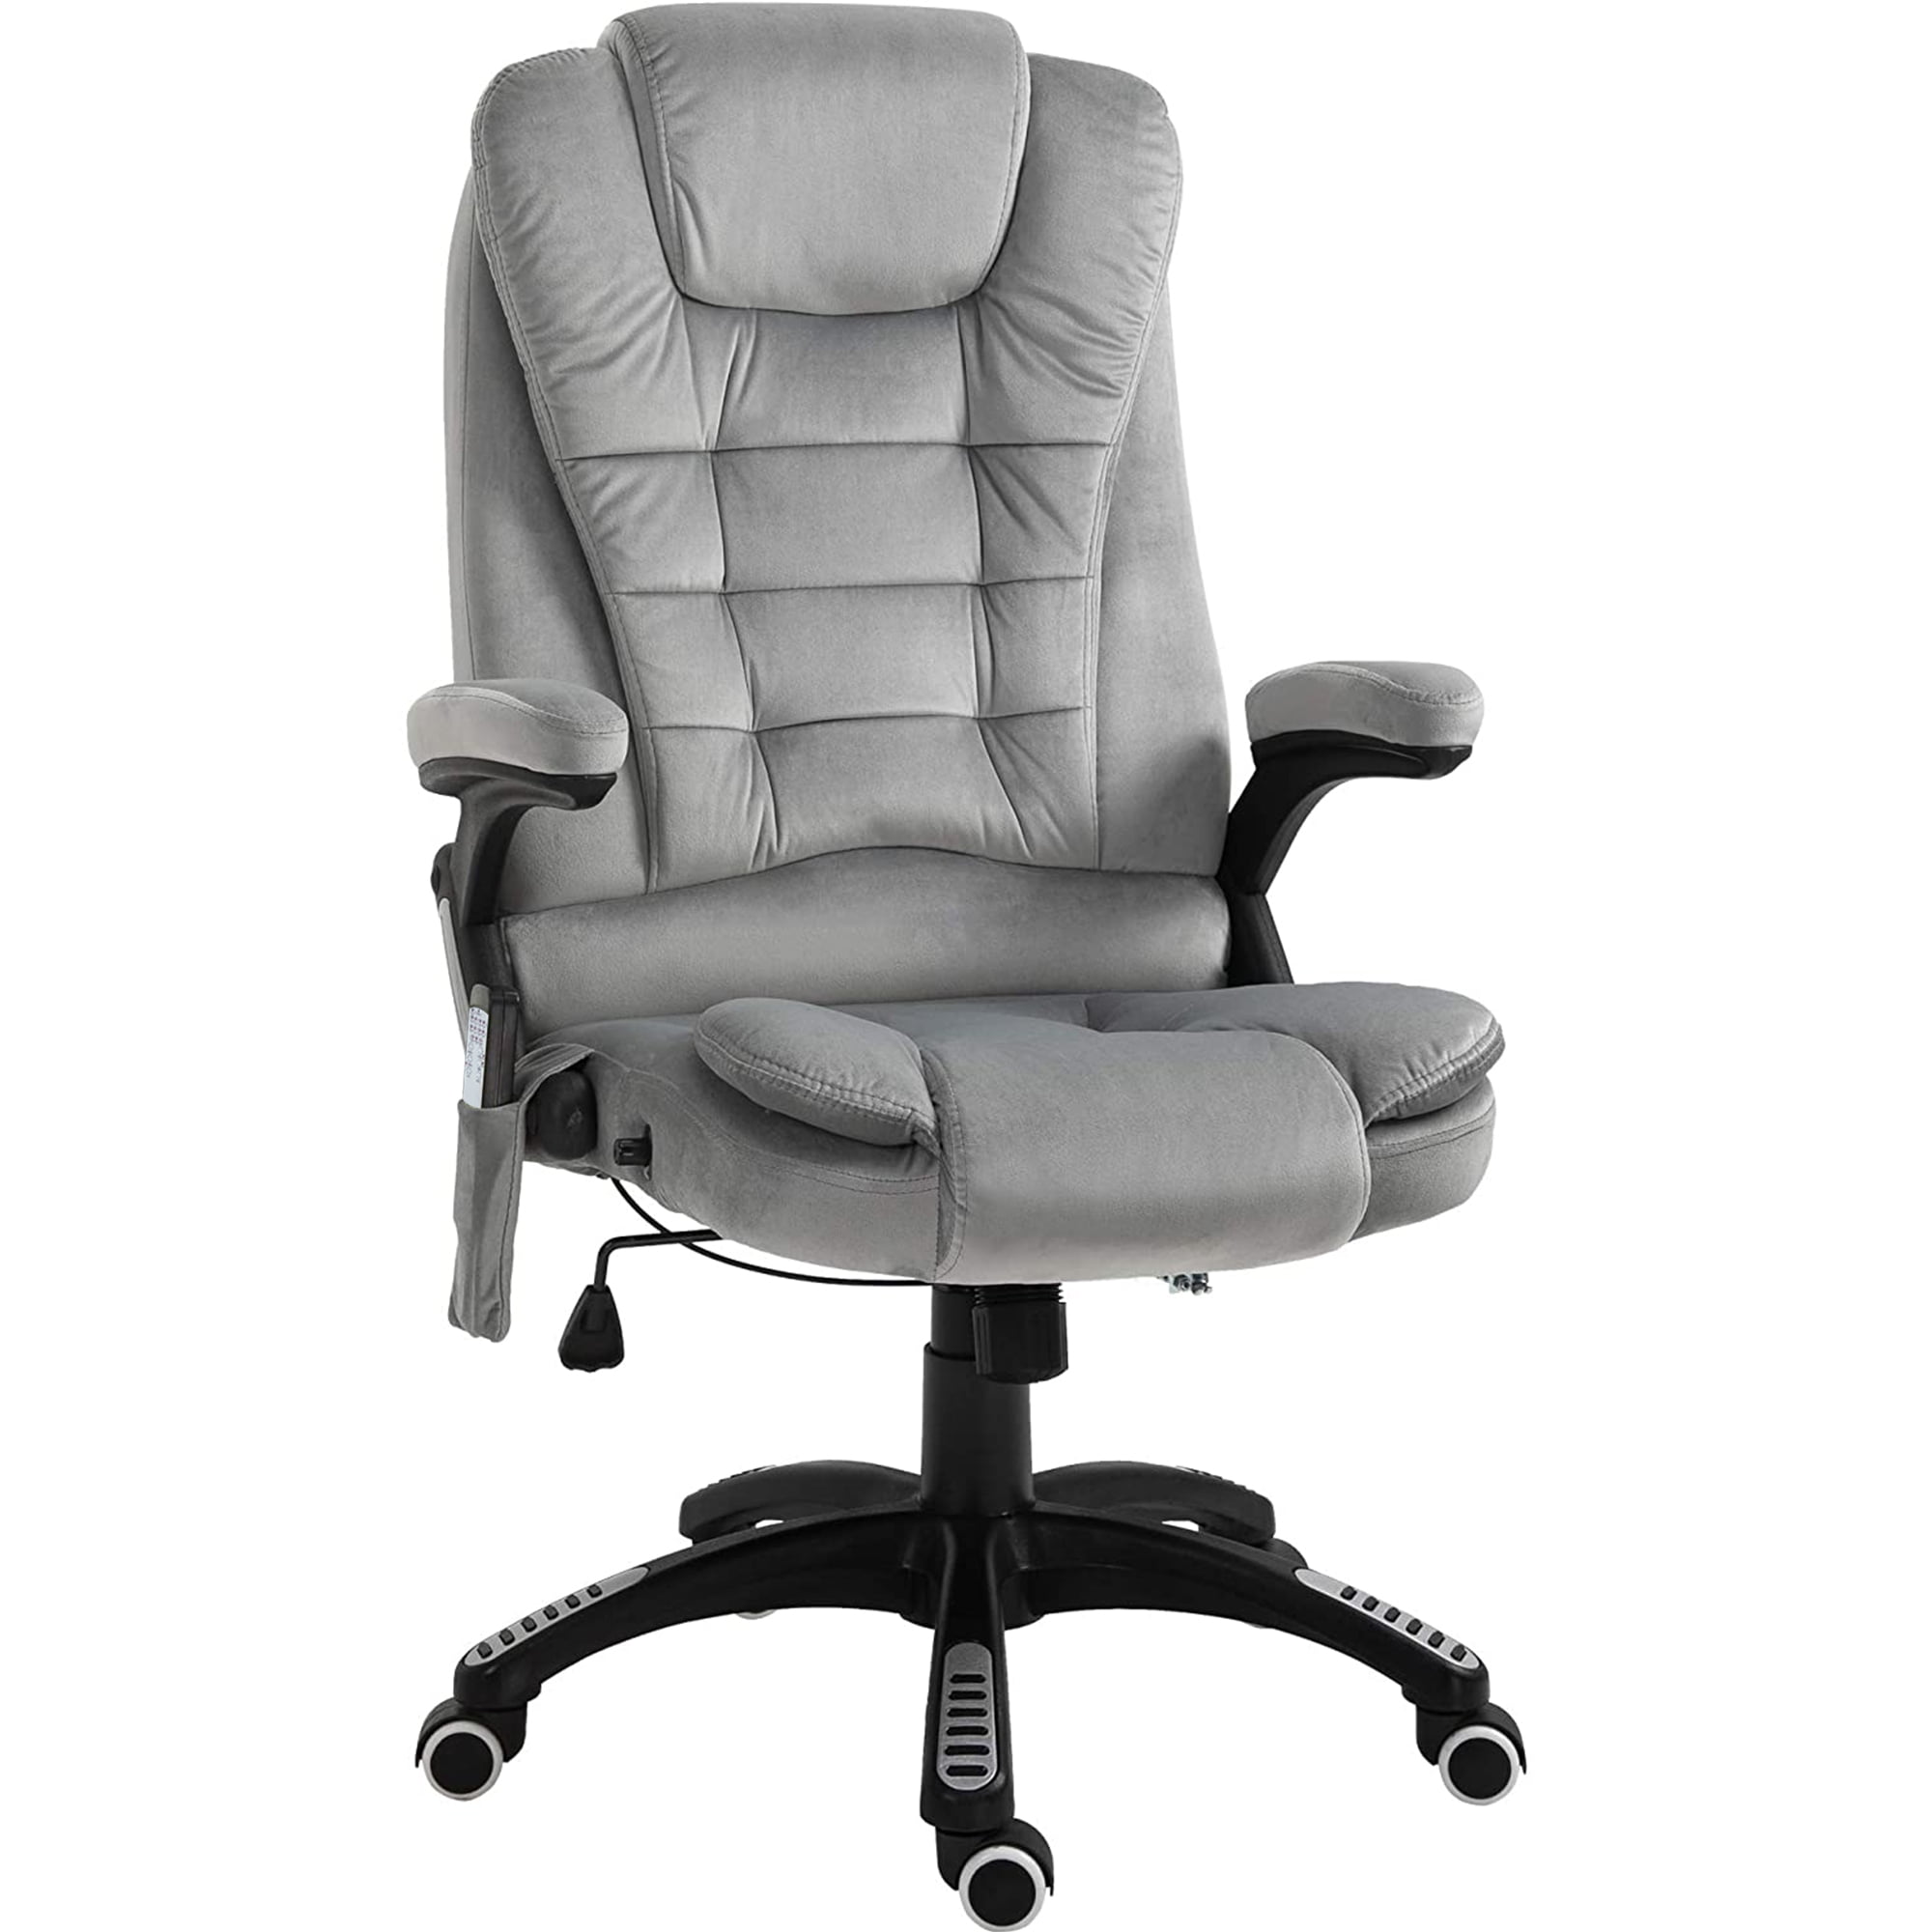 Vinsetto Ergonomic Massage Office Chair High Back Executive Chair with  Lumbar Support Armrest, Grey